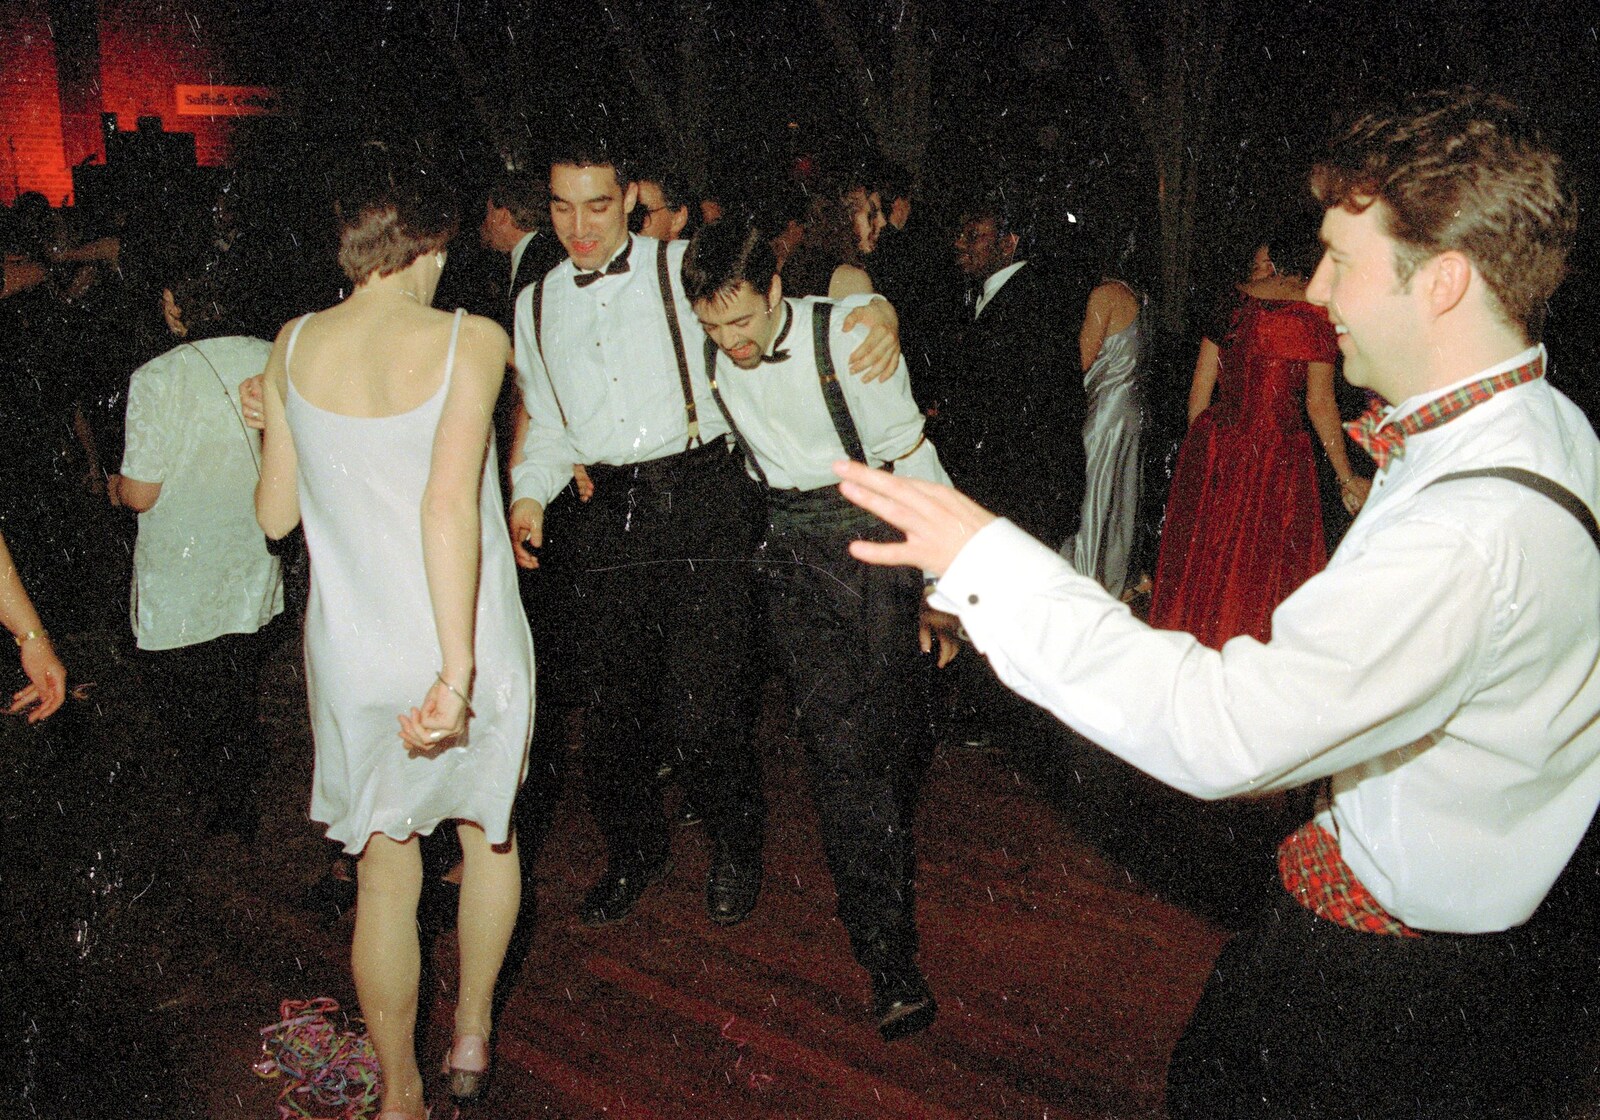 Trev has to be held up from CISU at the Suffolk College May Ball, Ipswich, Suffolk - 11th May 1997